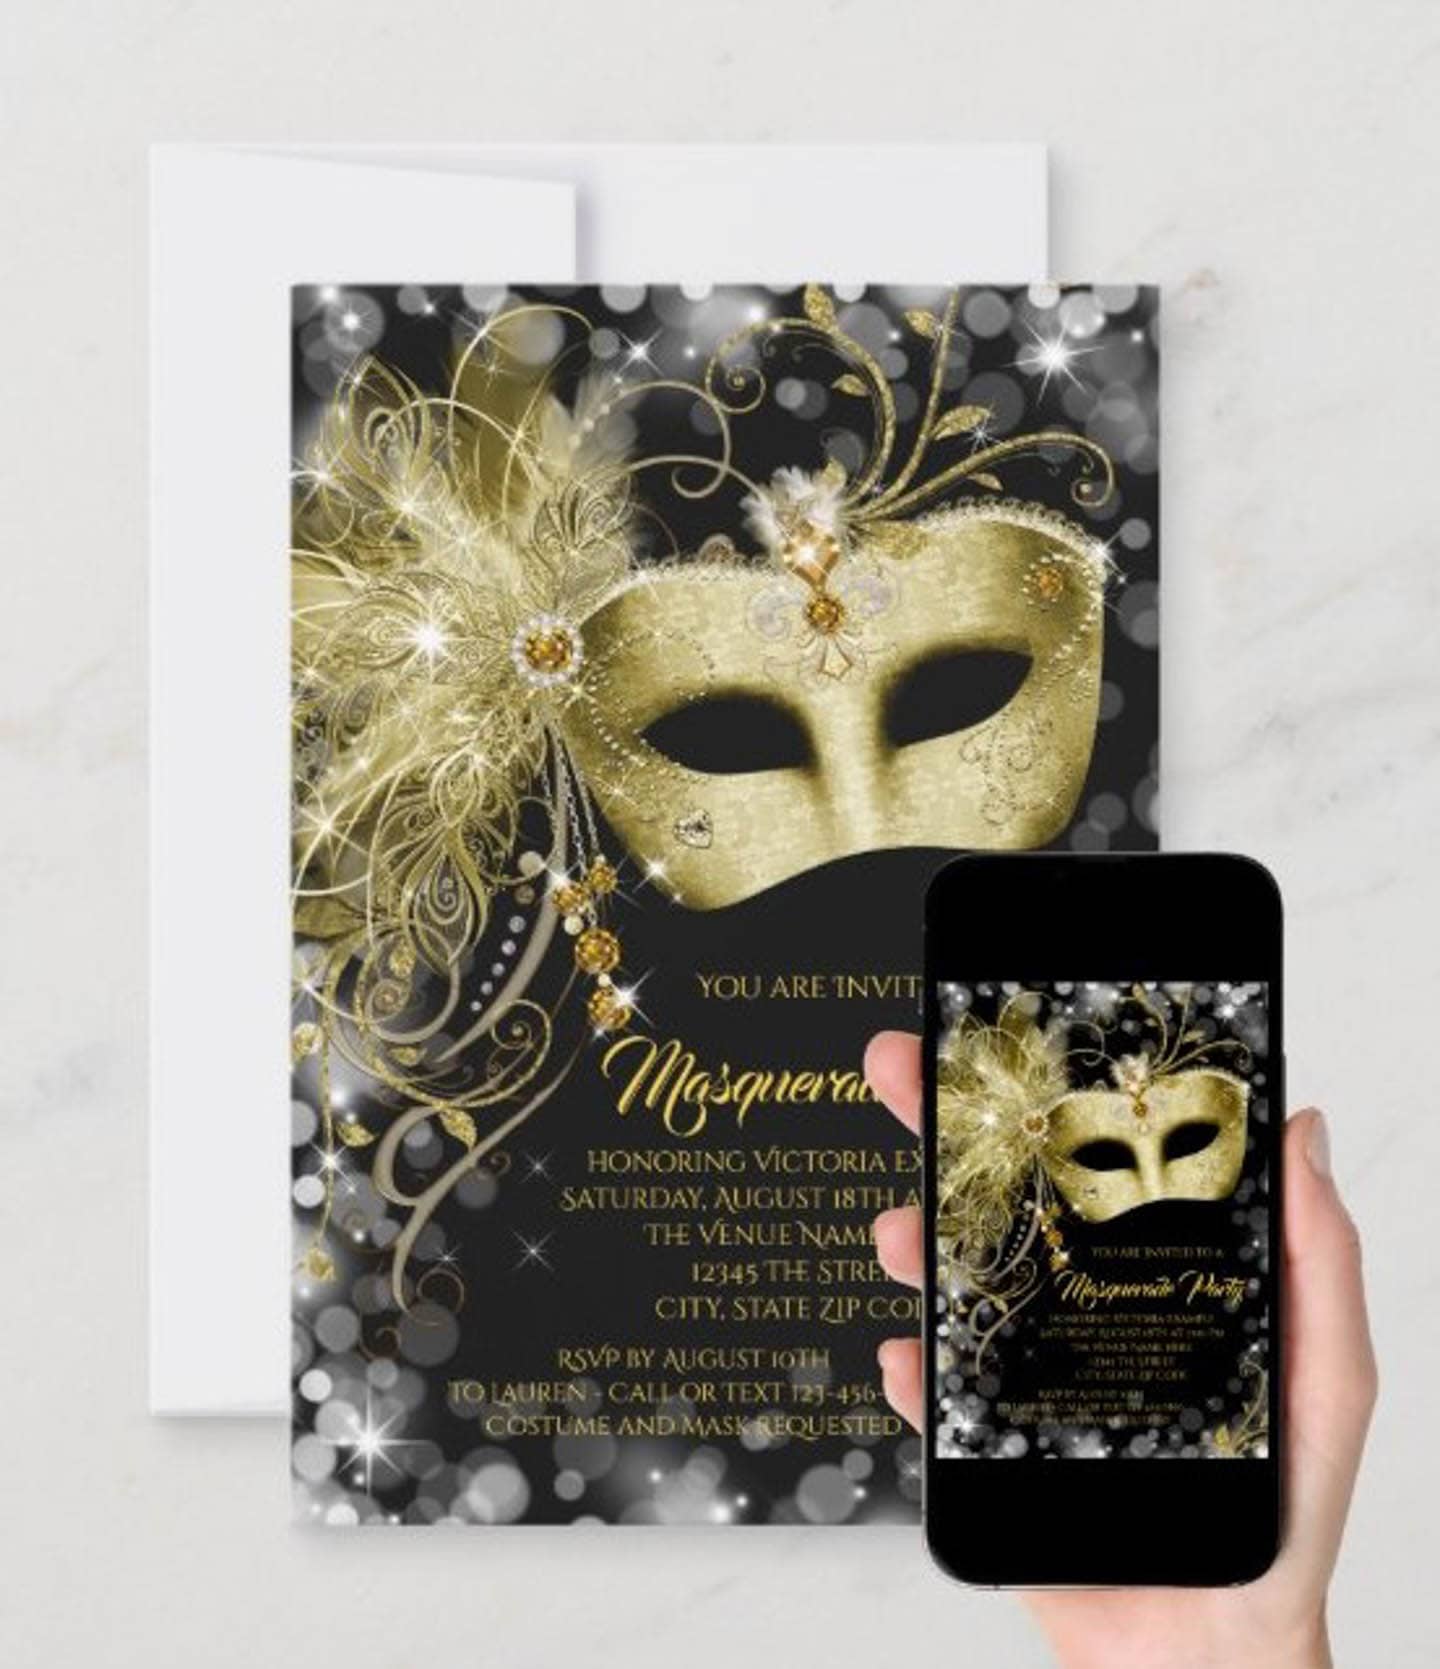 A Phantom of the Opera-inspired black and gold masquerade party invitation.